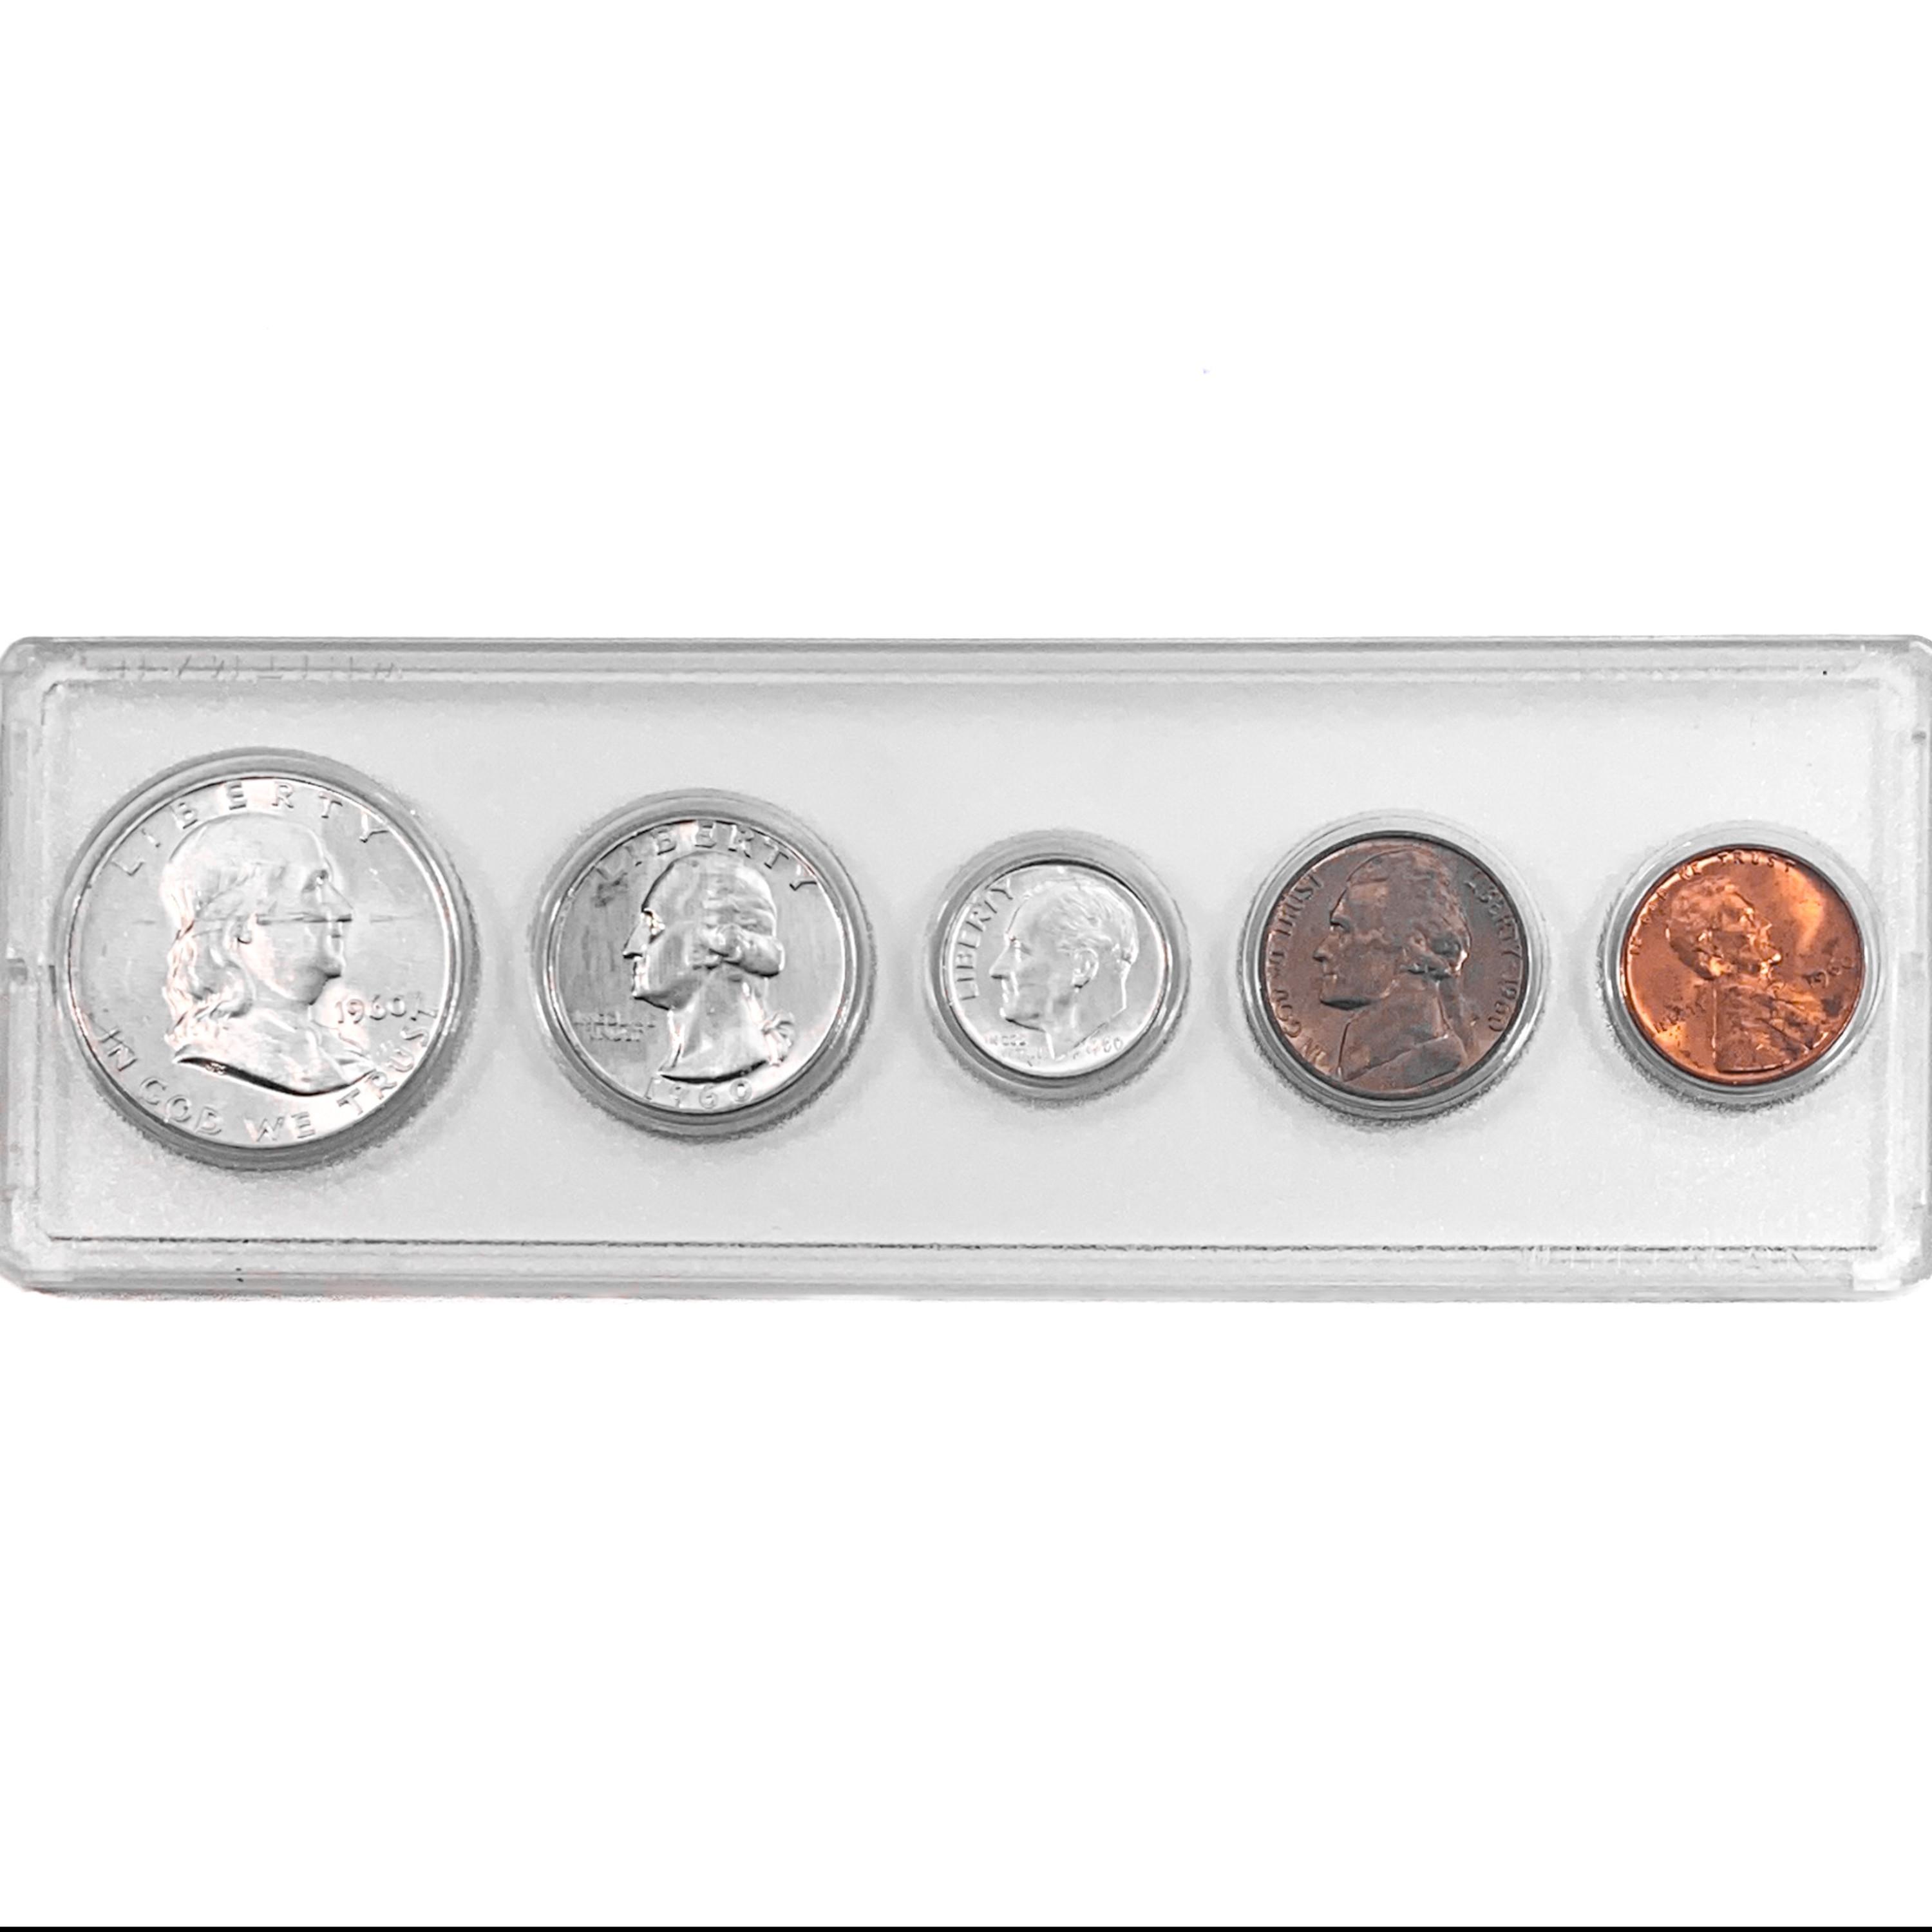 1960-1962 UNC US Year Sets [30 Coins]